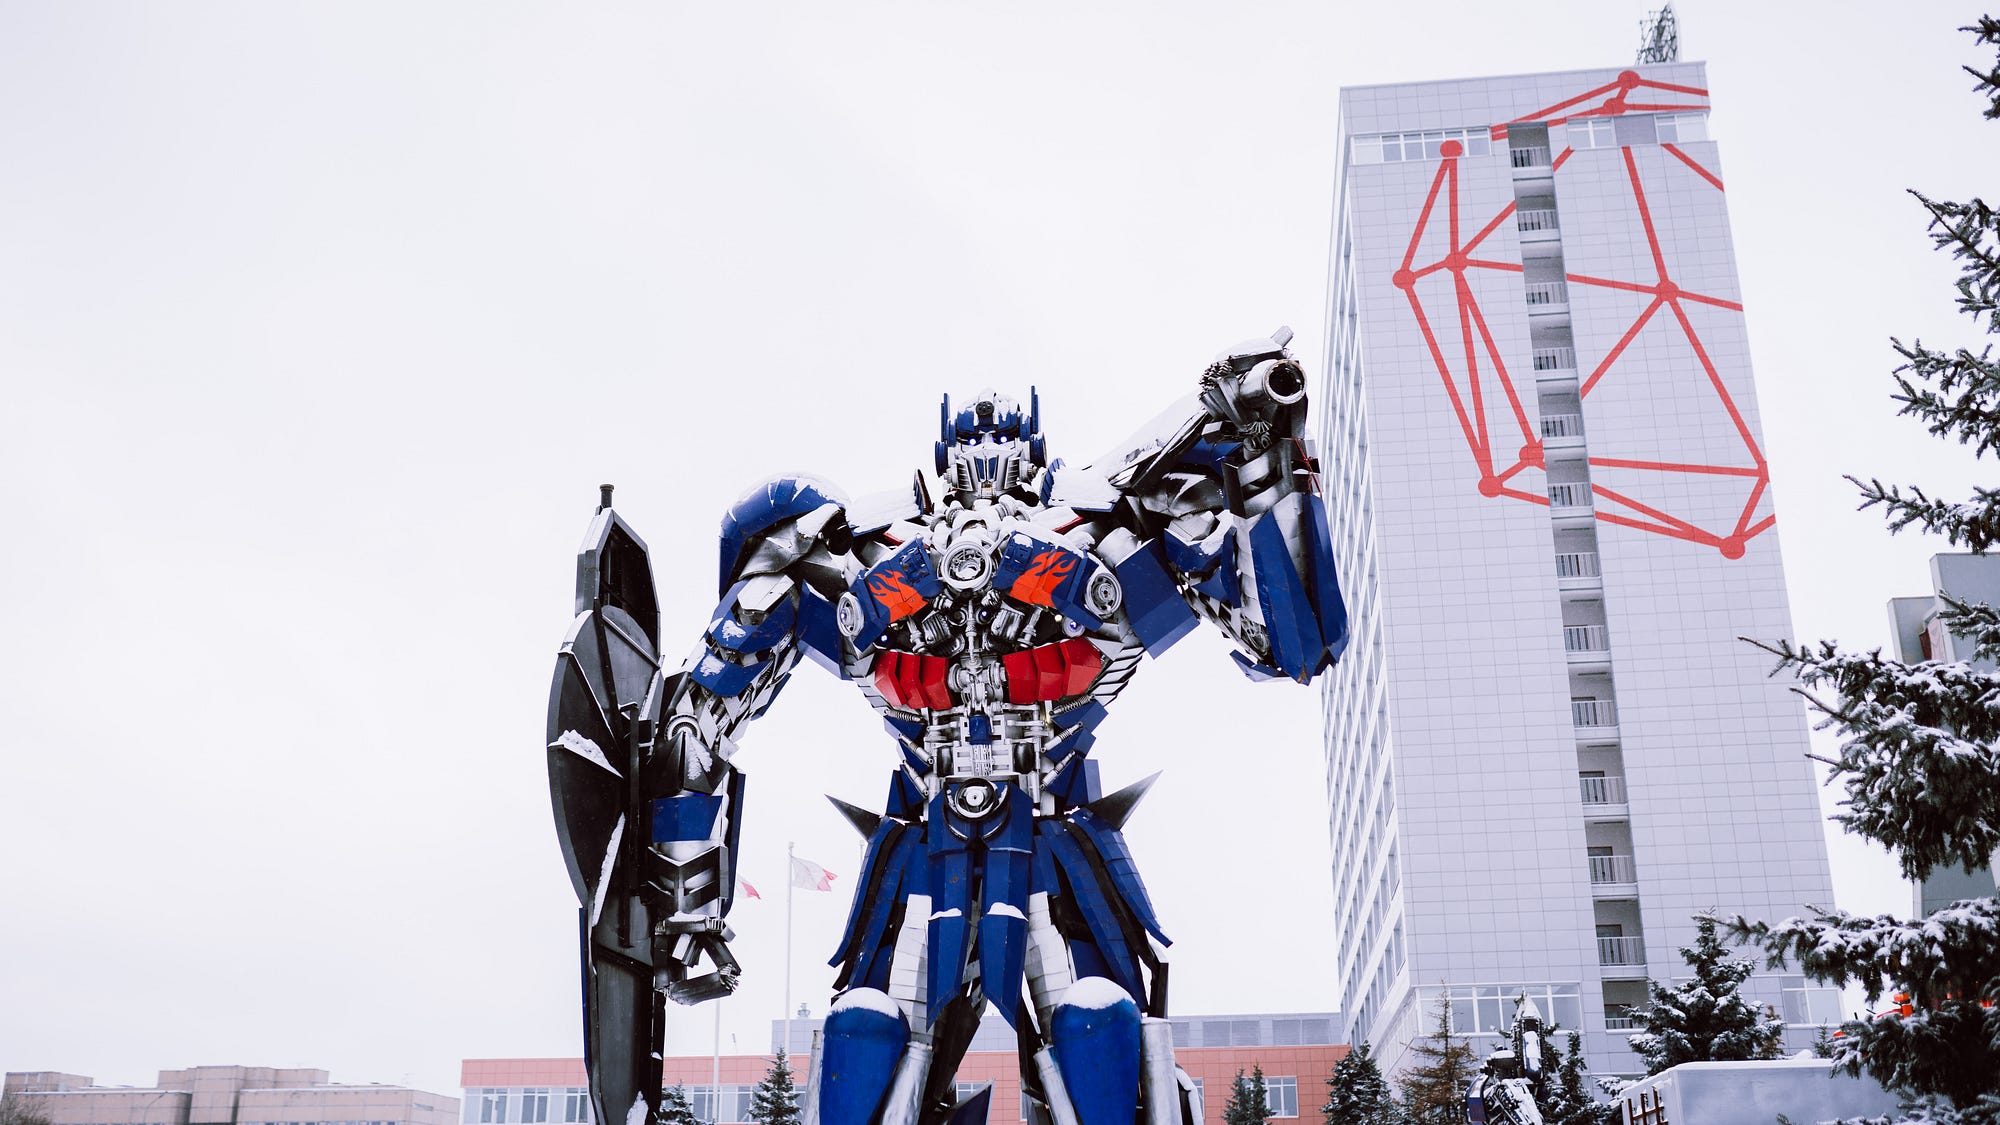 Transformers. Transformer models have become the…, by Vinithavn, Geek  Culture